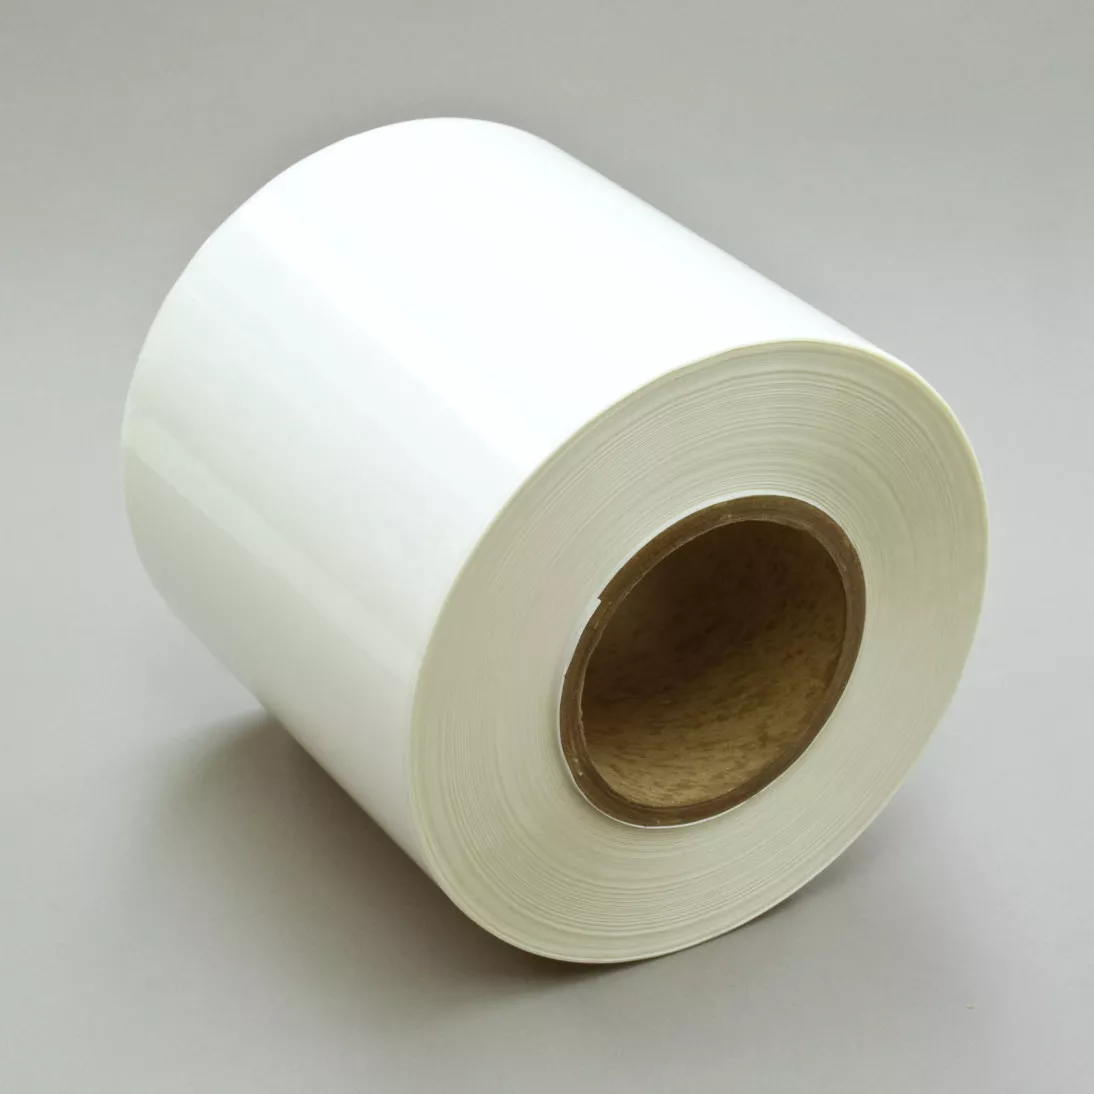 3M™ Thermal Transfer Label Material 7876, Clear Polyester Gloss, 4.5 in
x 1668 ft, 1 roll per case